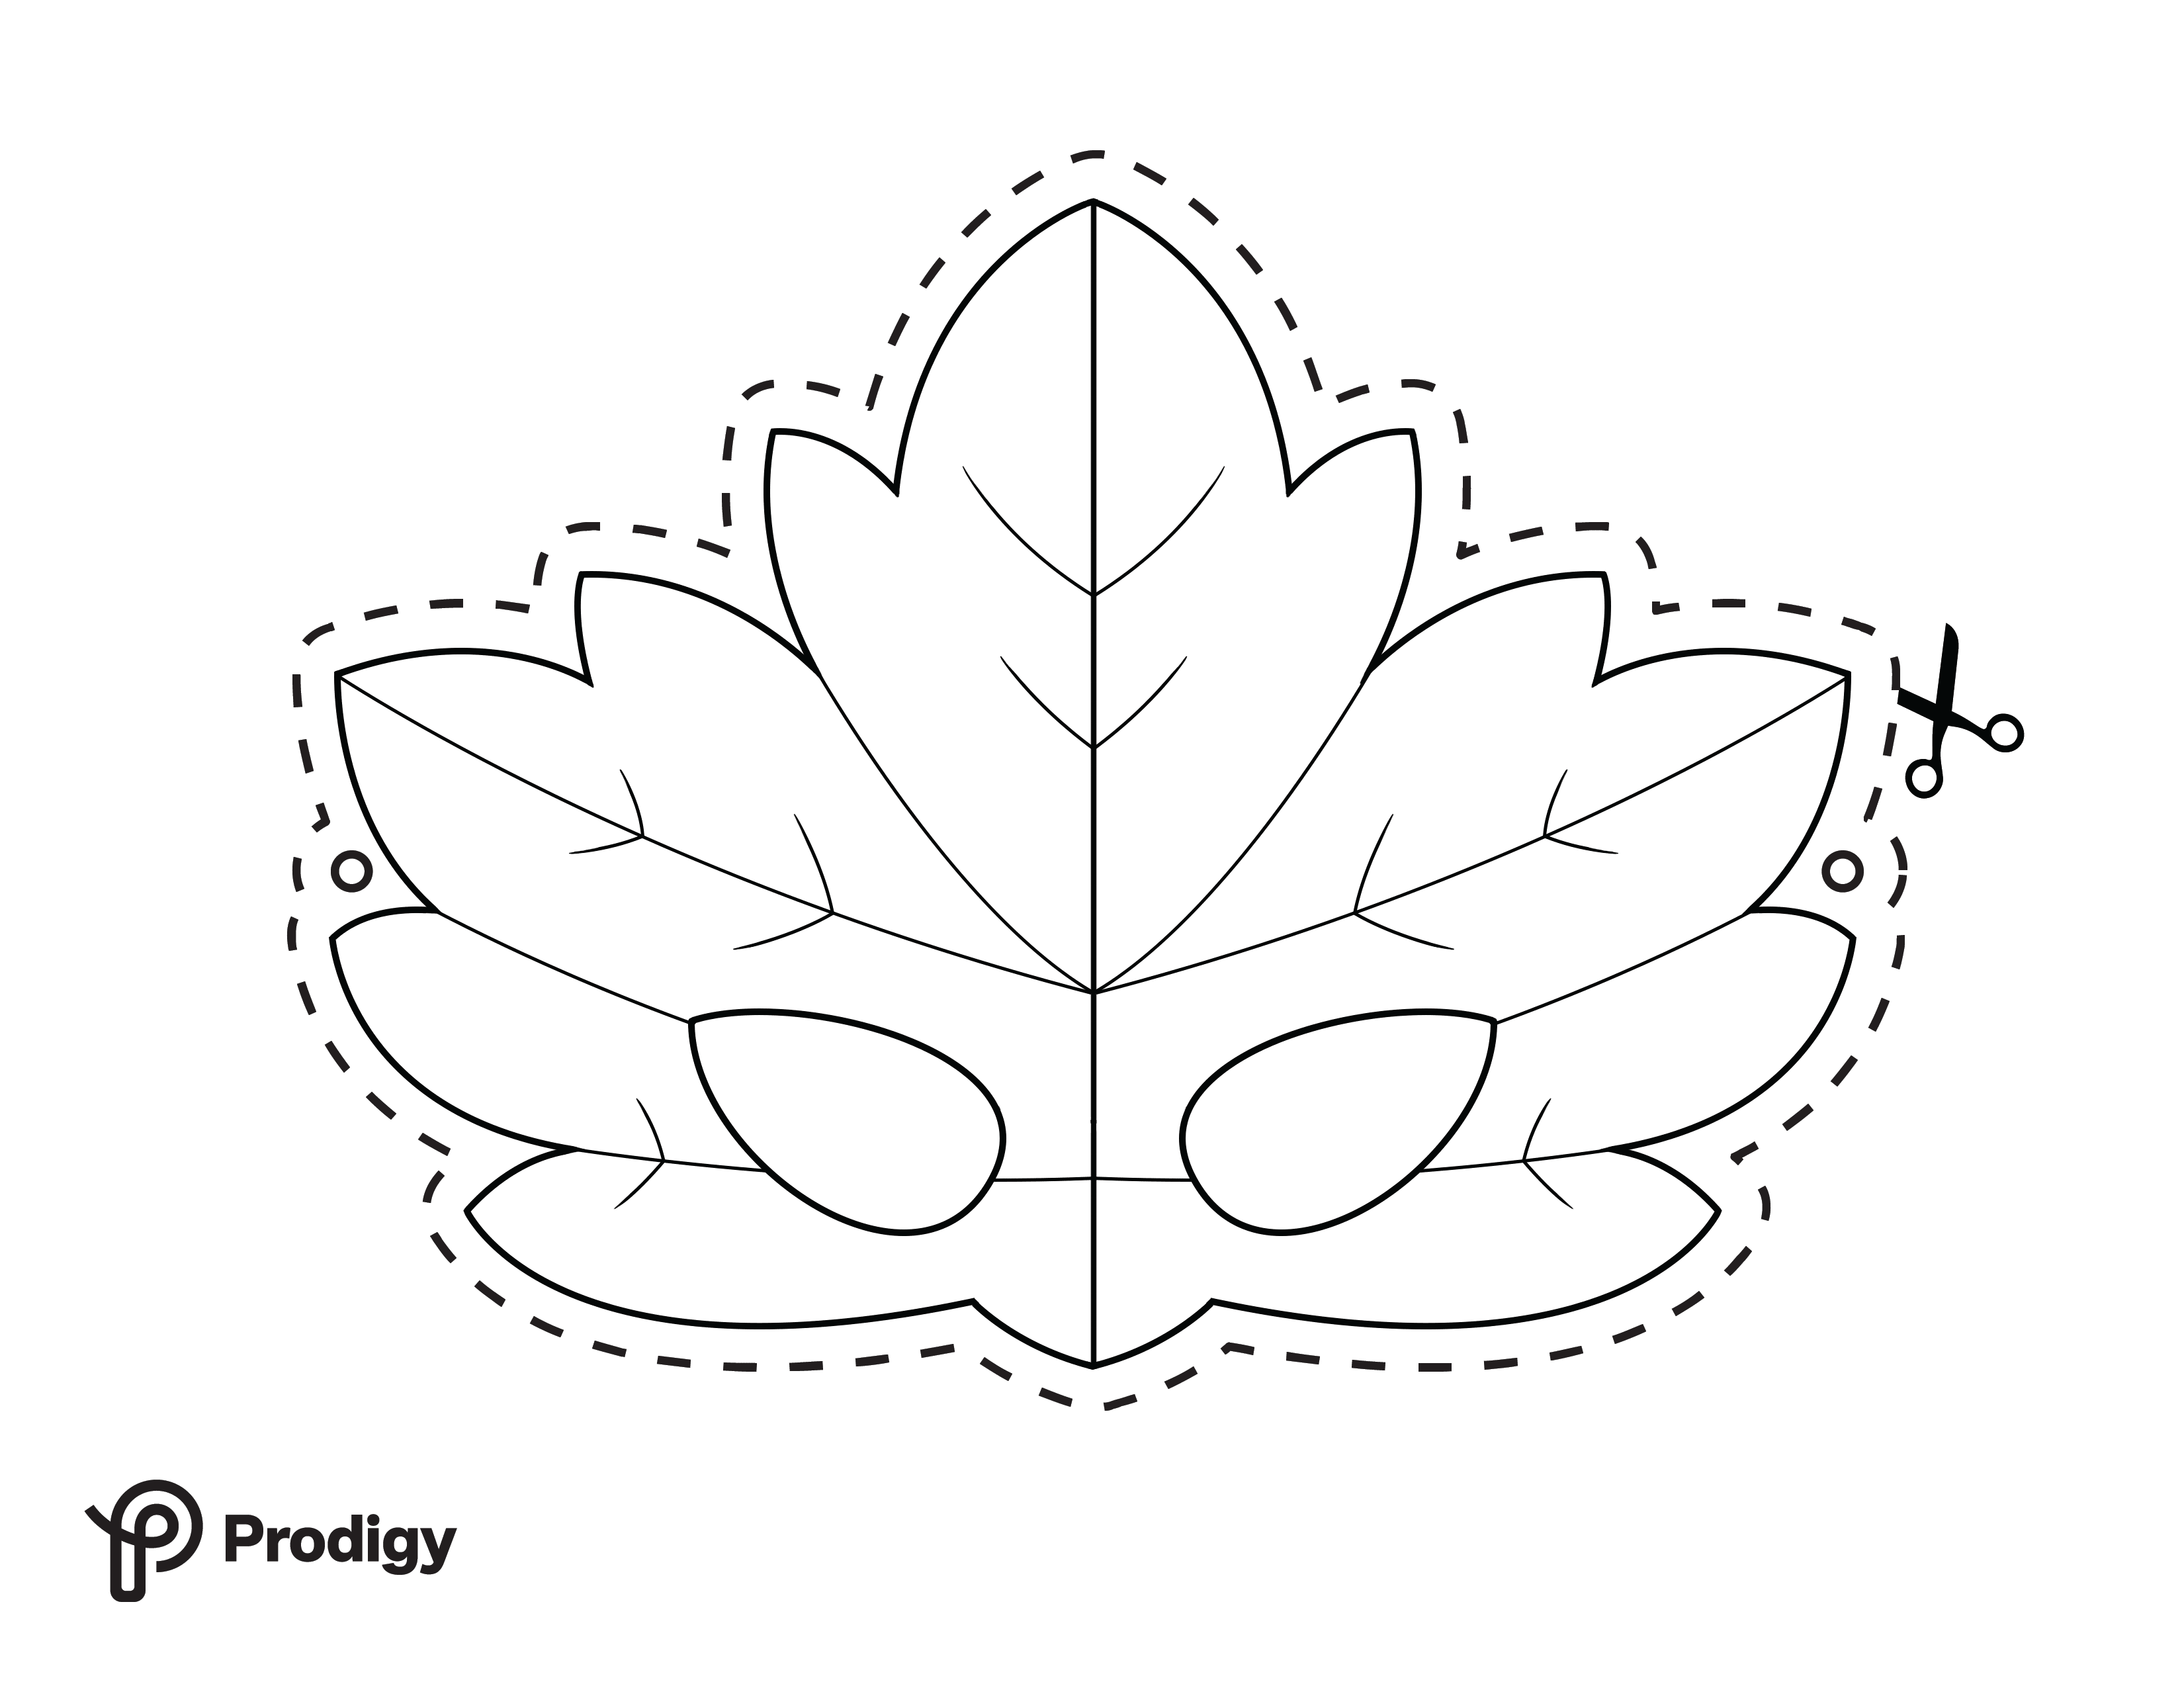 Printable Prodigy fall leaf mask in black and white coloring page